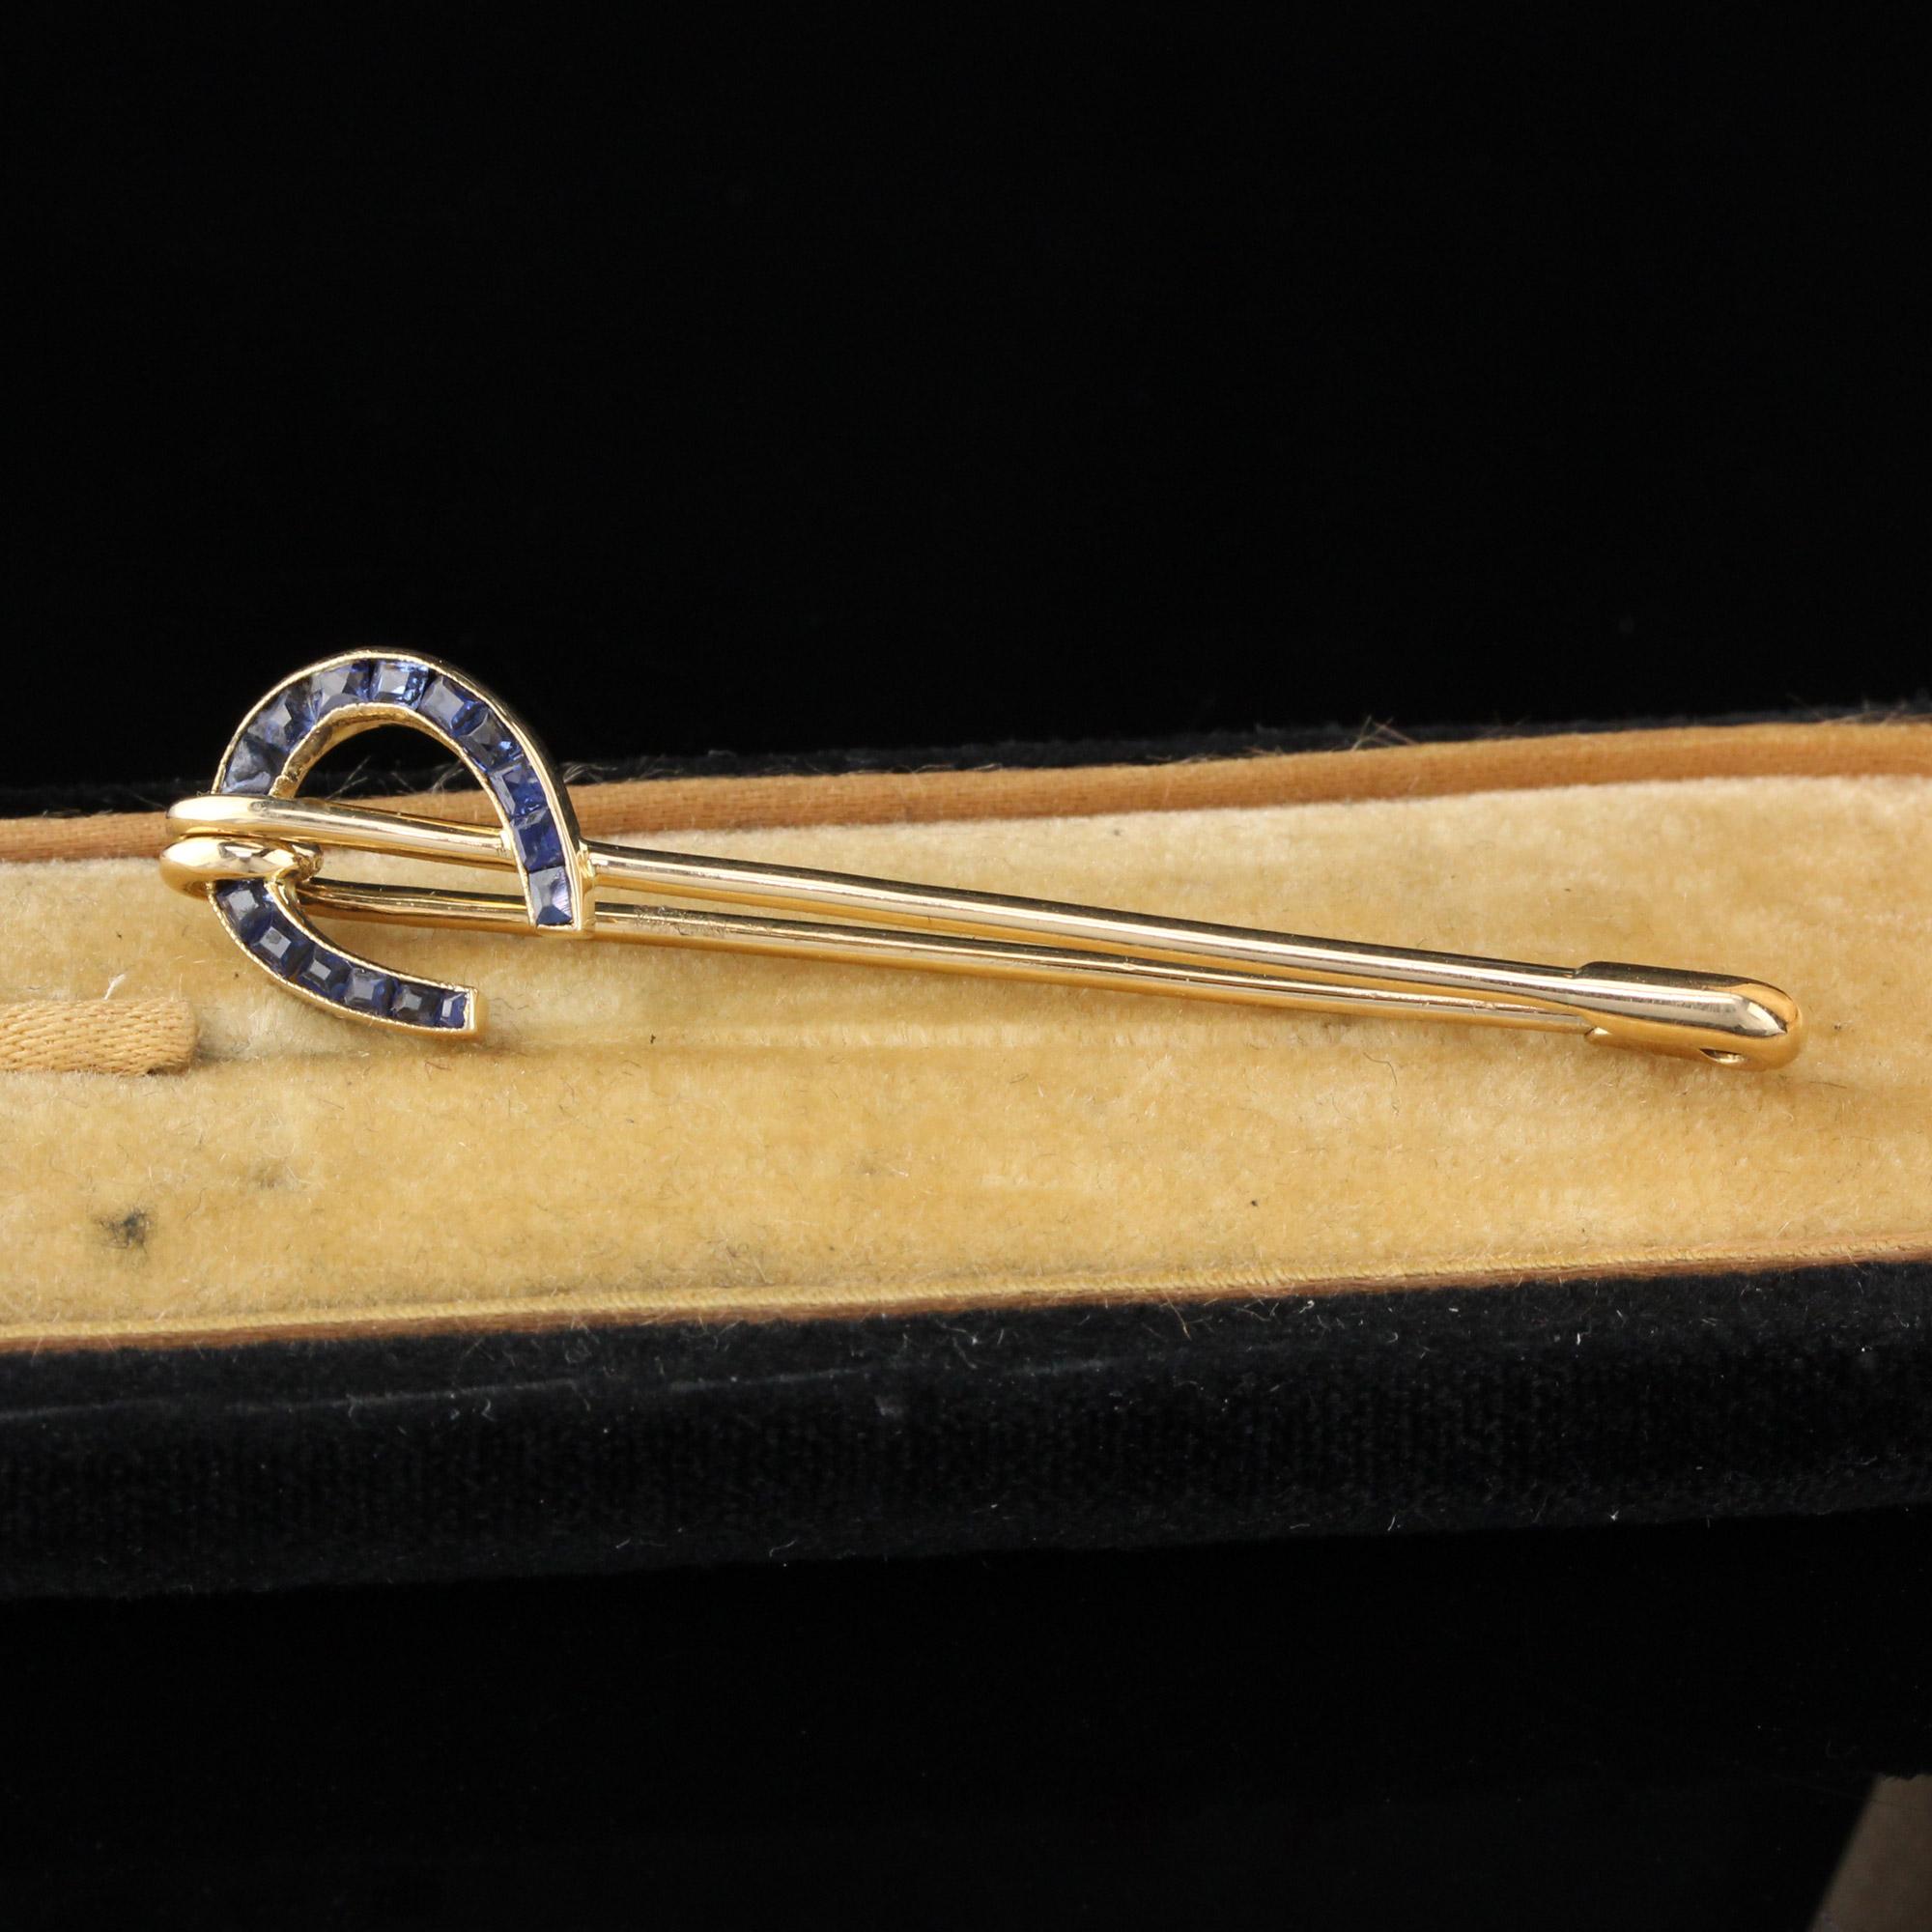 This is an amazing vintage safety-pin style sapphire horseshoe pin.

Metal: 18K Yellow Gold

Weight: 2.8 Grams

Gemstone Weight: Approximately 0.40 cts

Measurements: 11.4 mm in length